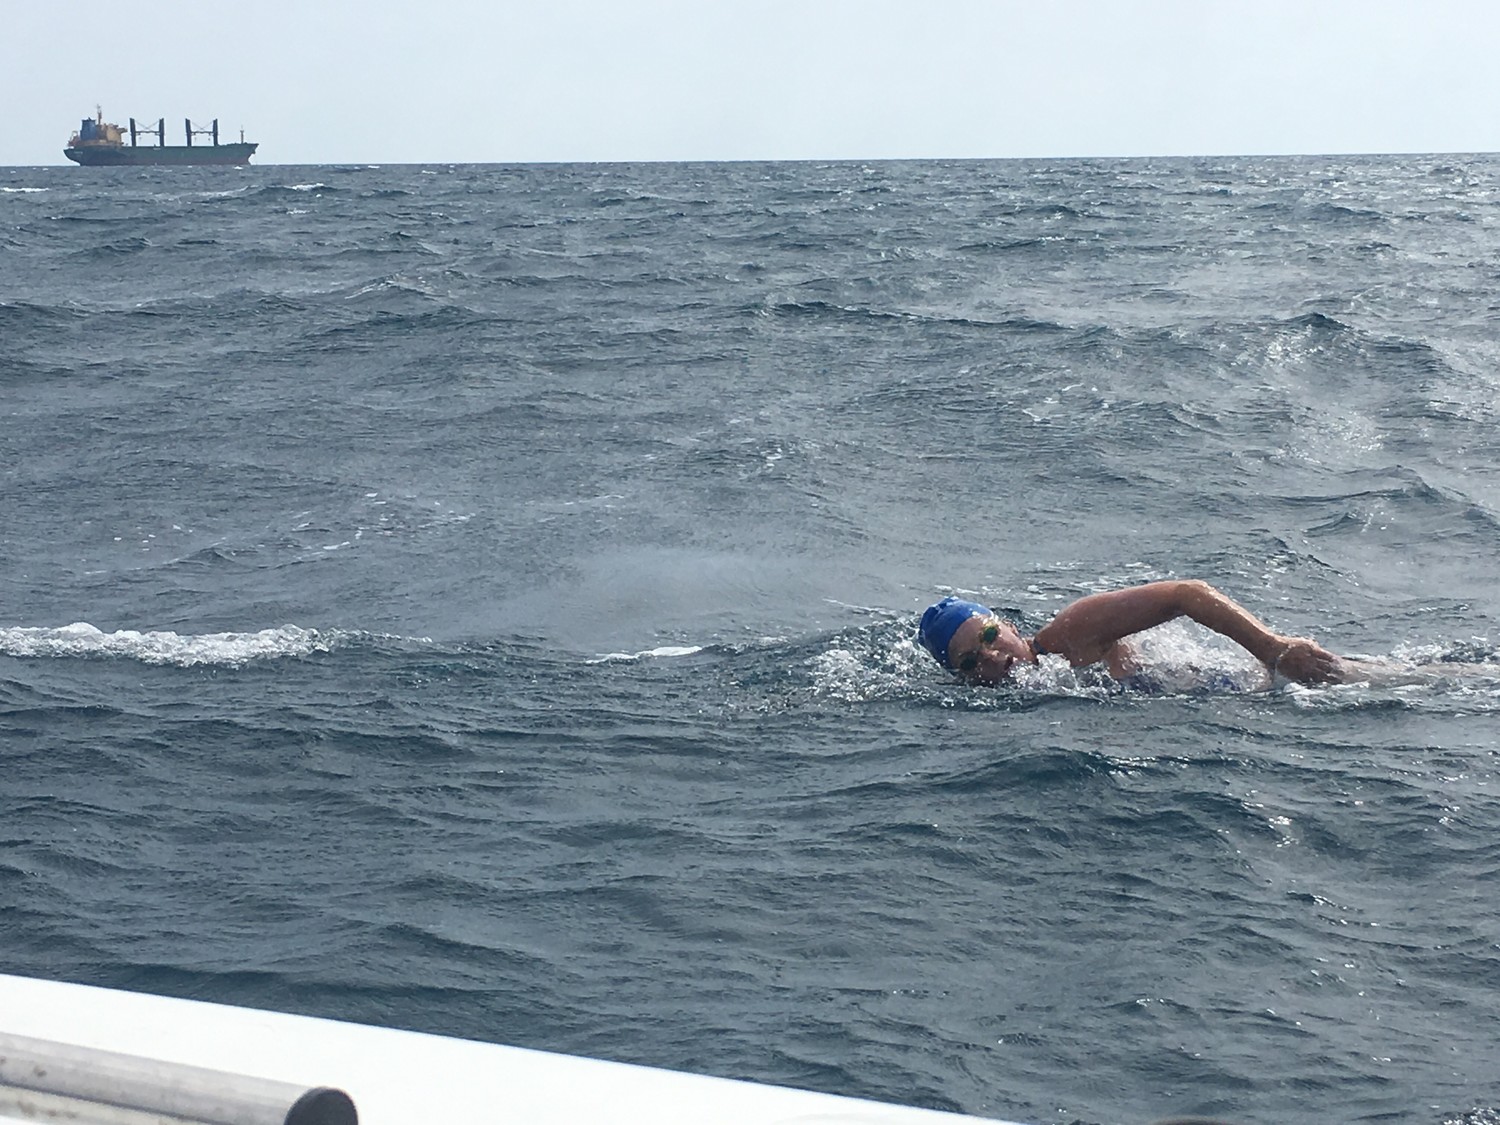 Open-water swimmer Lori King, of Rockville Centre, finished third in the 29th Swimming Marathon of Messinian Gulf in northern Greece earlier this month, completing the 30-kilometer race in 8 hours, 56 minutes.